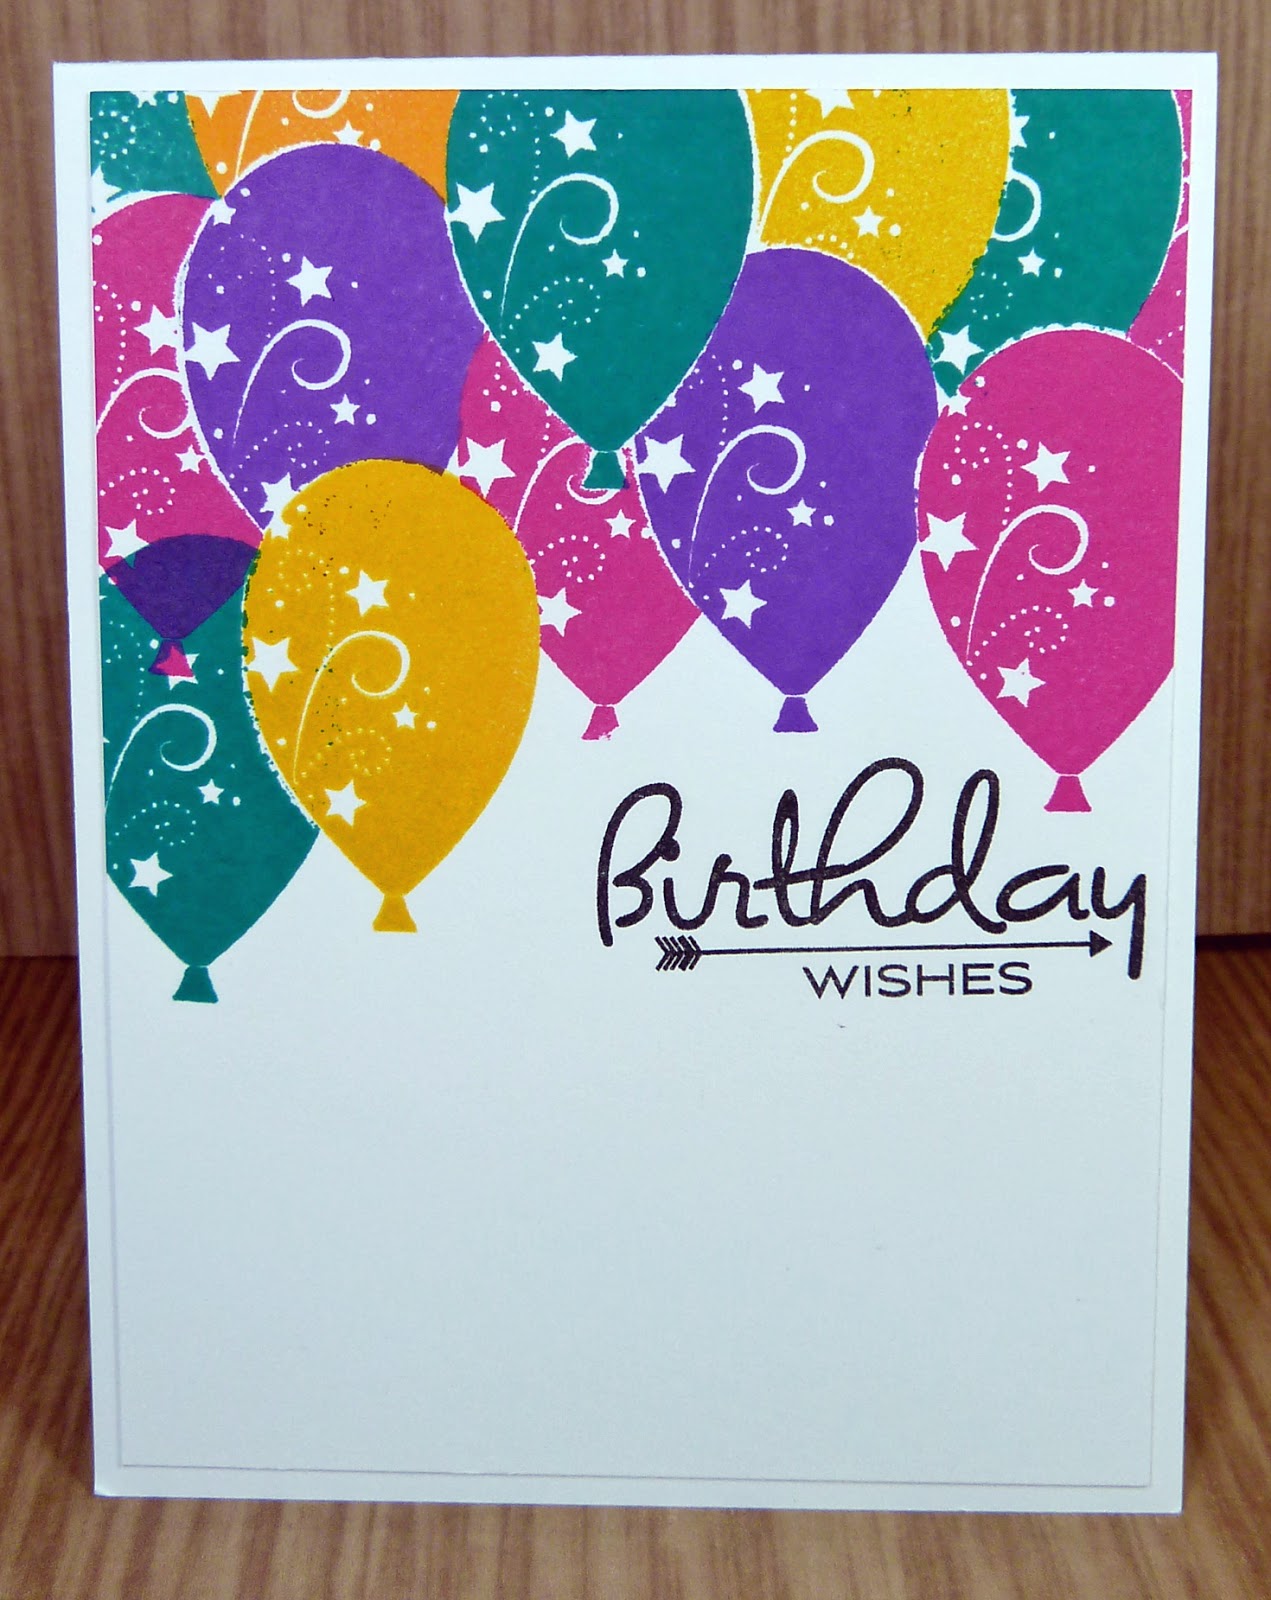 Cards-by-the-Sea: CASology 5 Year Anniversary Blog Hop: Week #259: Balloon